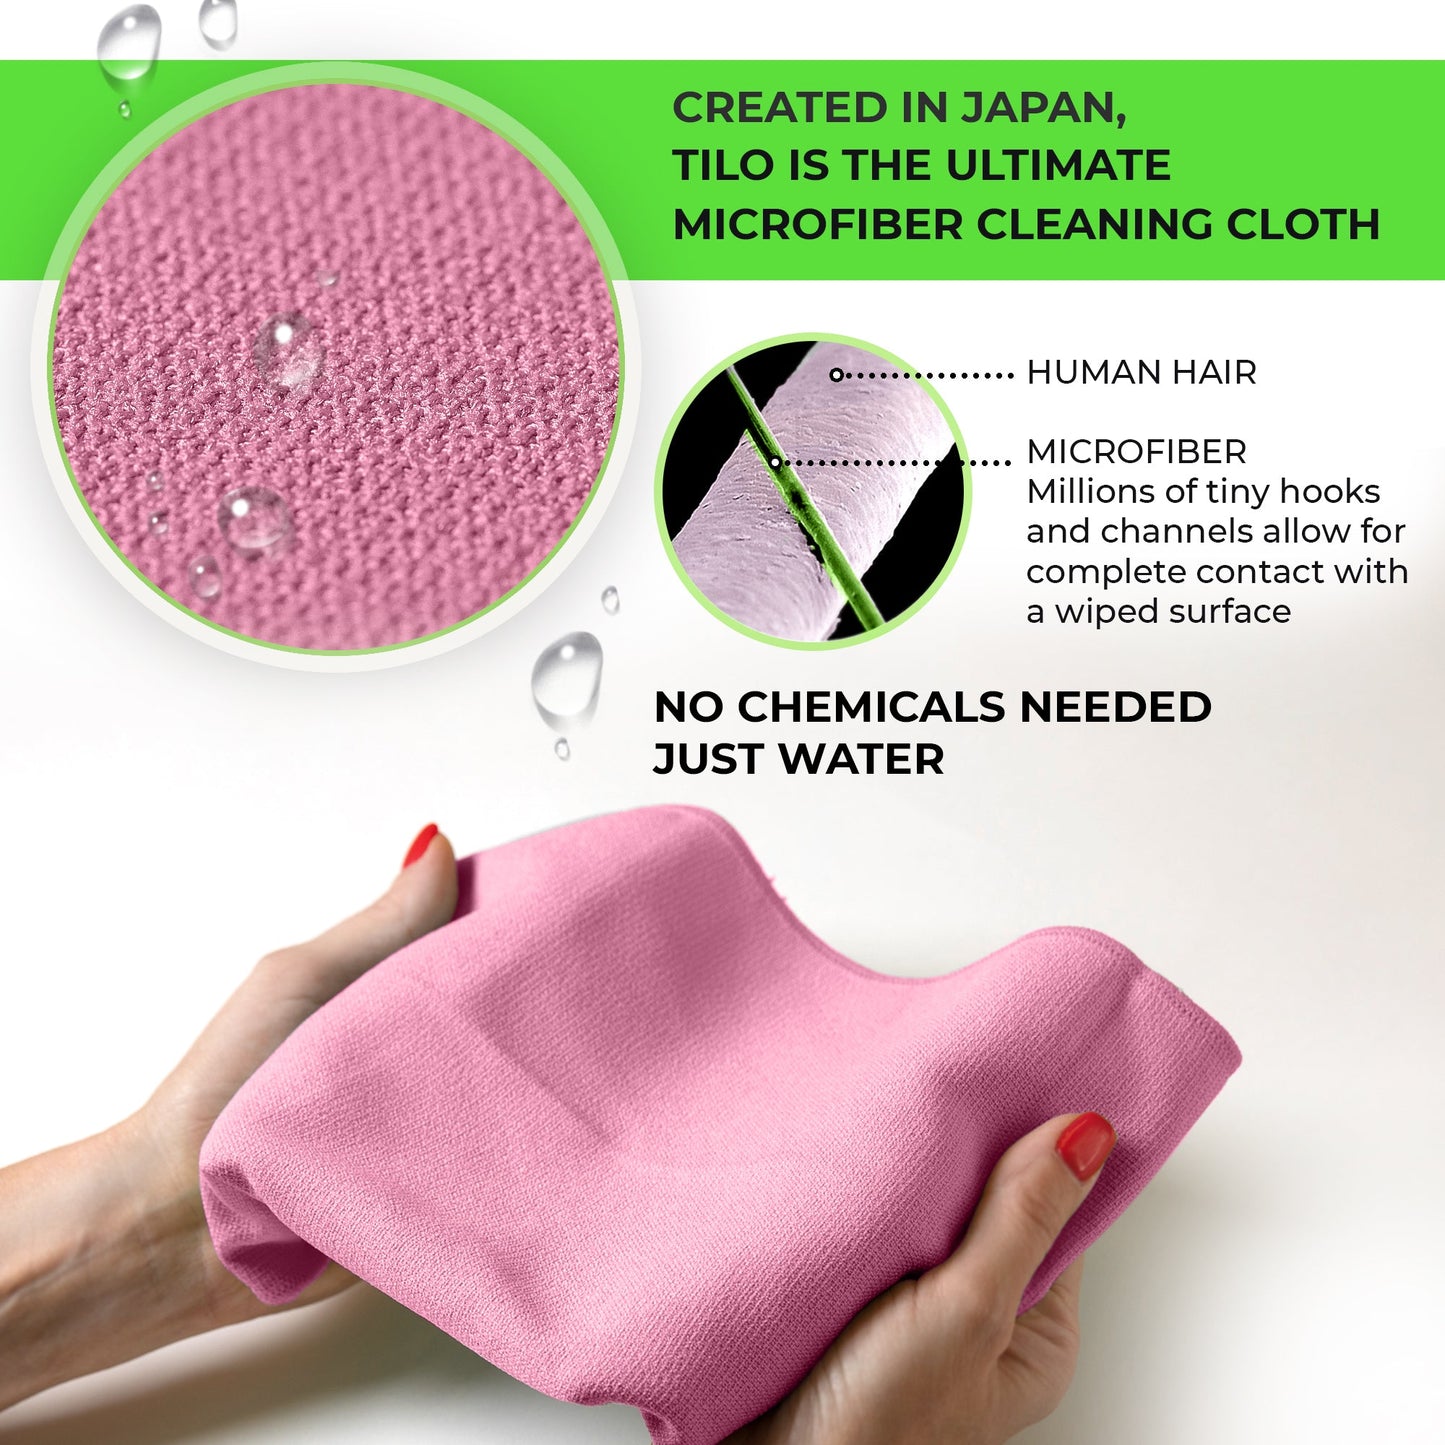 TiLO Microfiber Cleaning Cloth – 19.75 x 13-inch Reusable – Pink - TiLO The Ultimate